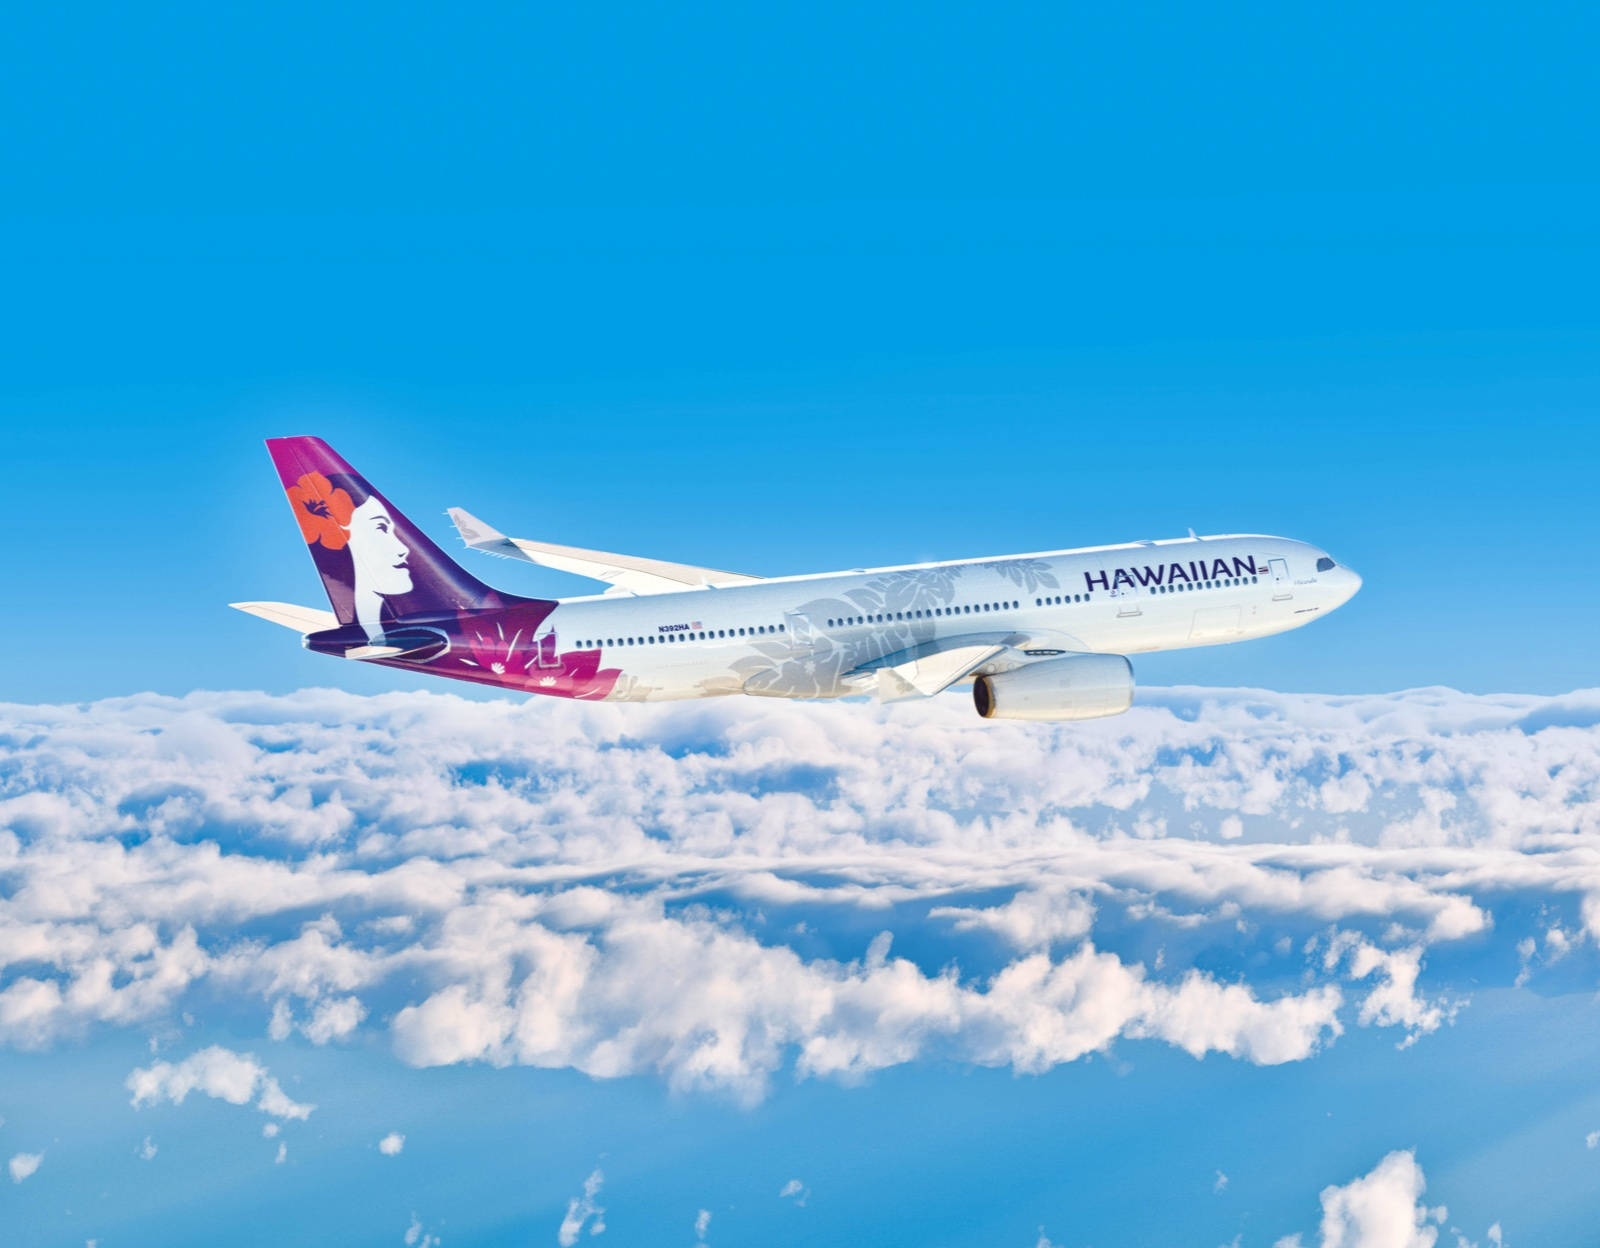 Hawaiian Airlines On Sea Of Clouds Wallpaper